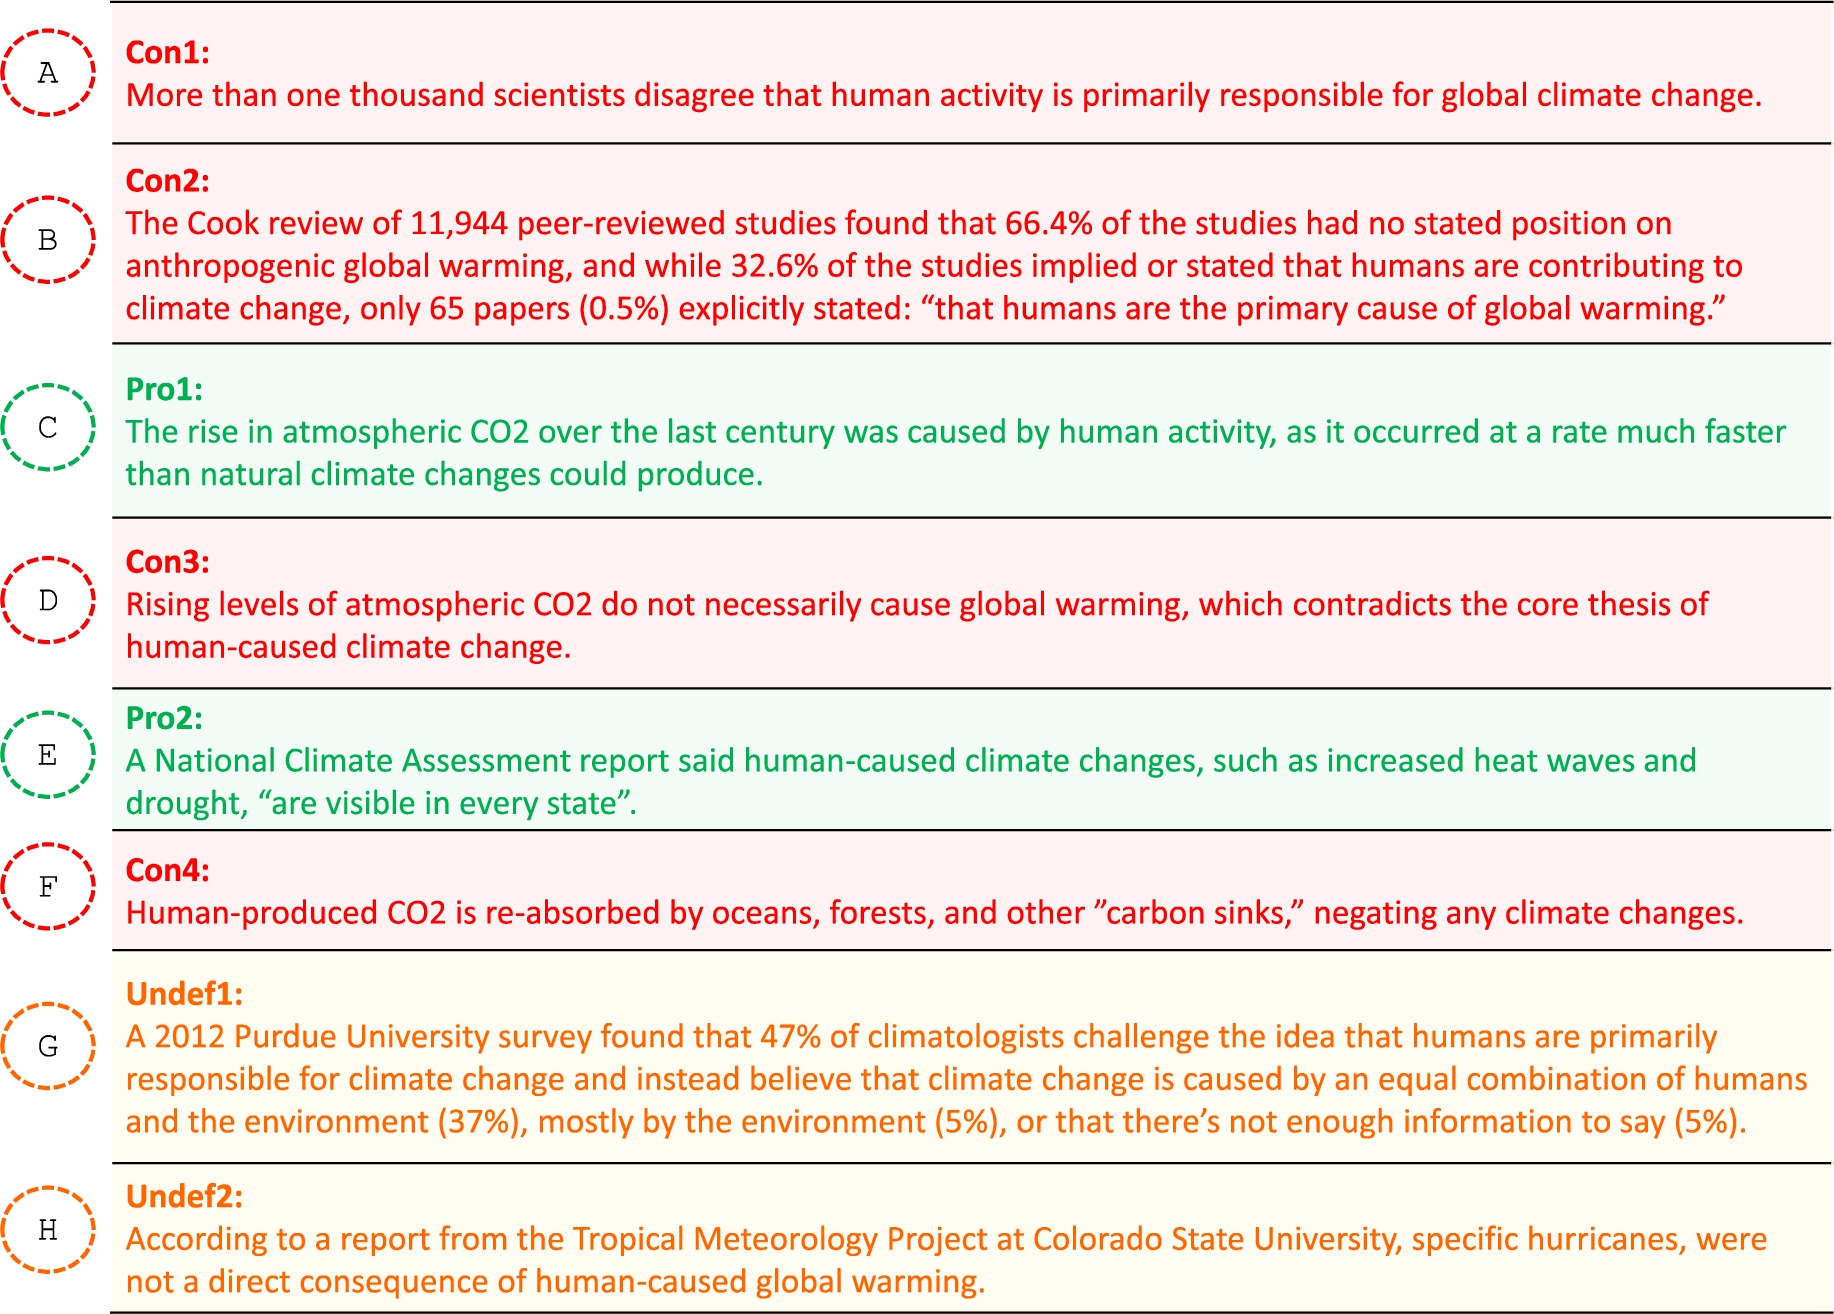 Arguments in favor and against the possible causes of climate change.